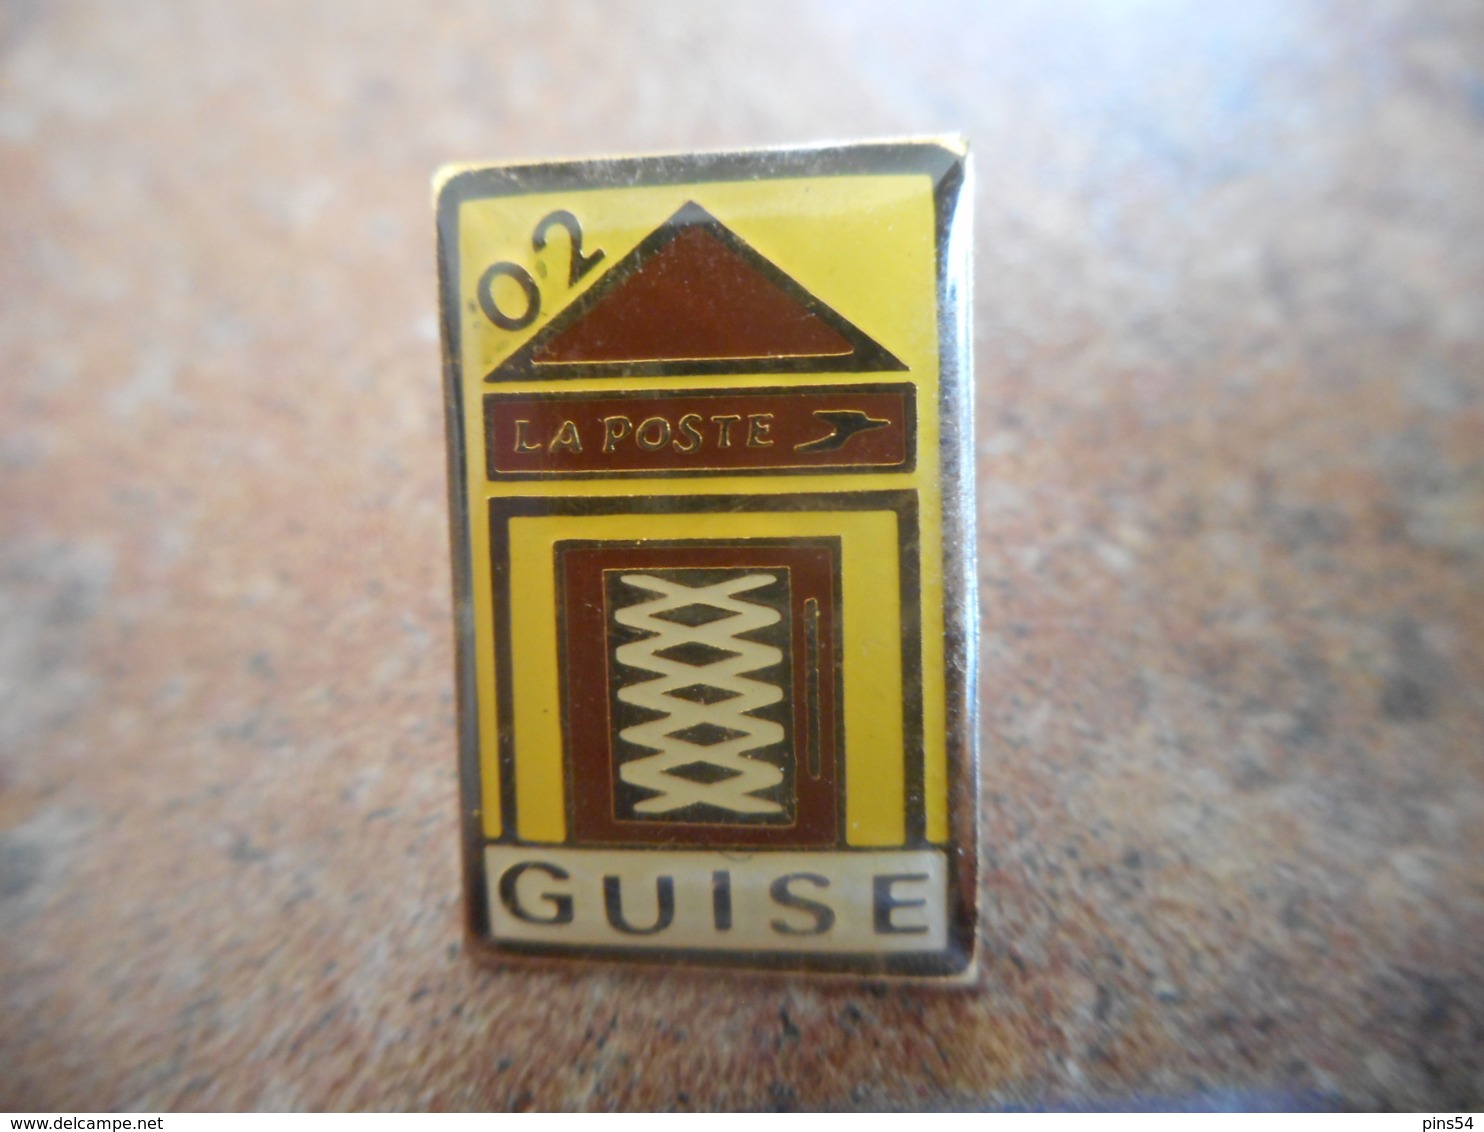 A040 -- Pin's Poste 02 Guise -- Exclusif Sur Delcampe - Mail Services